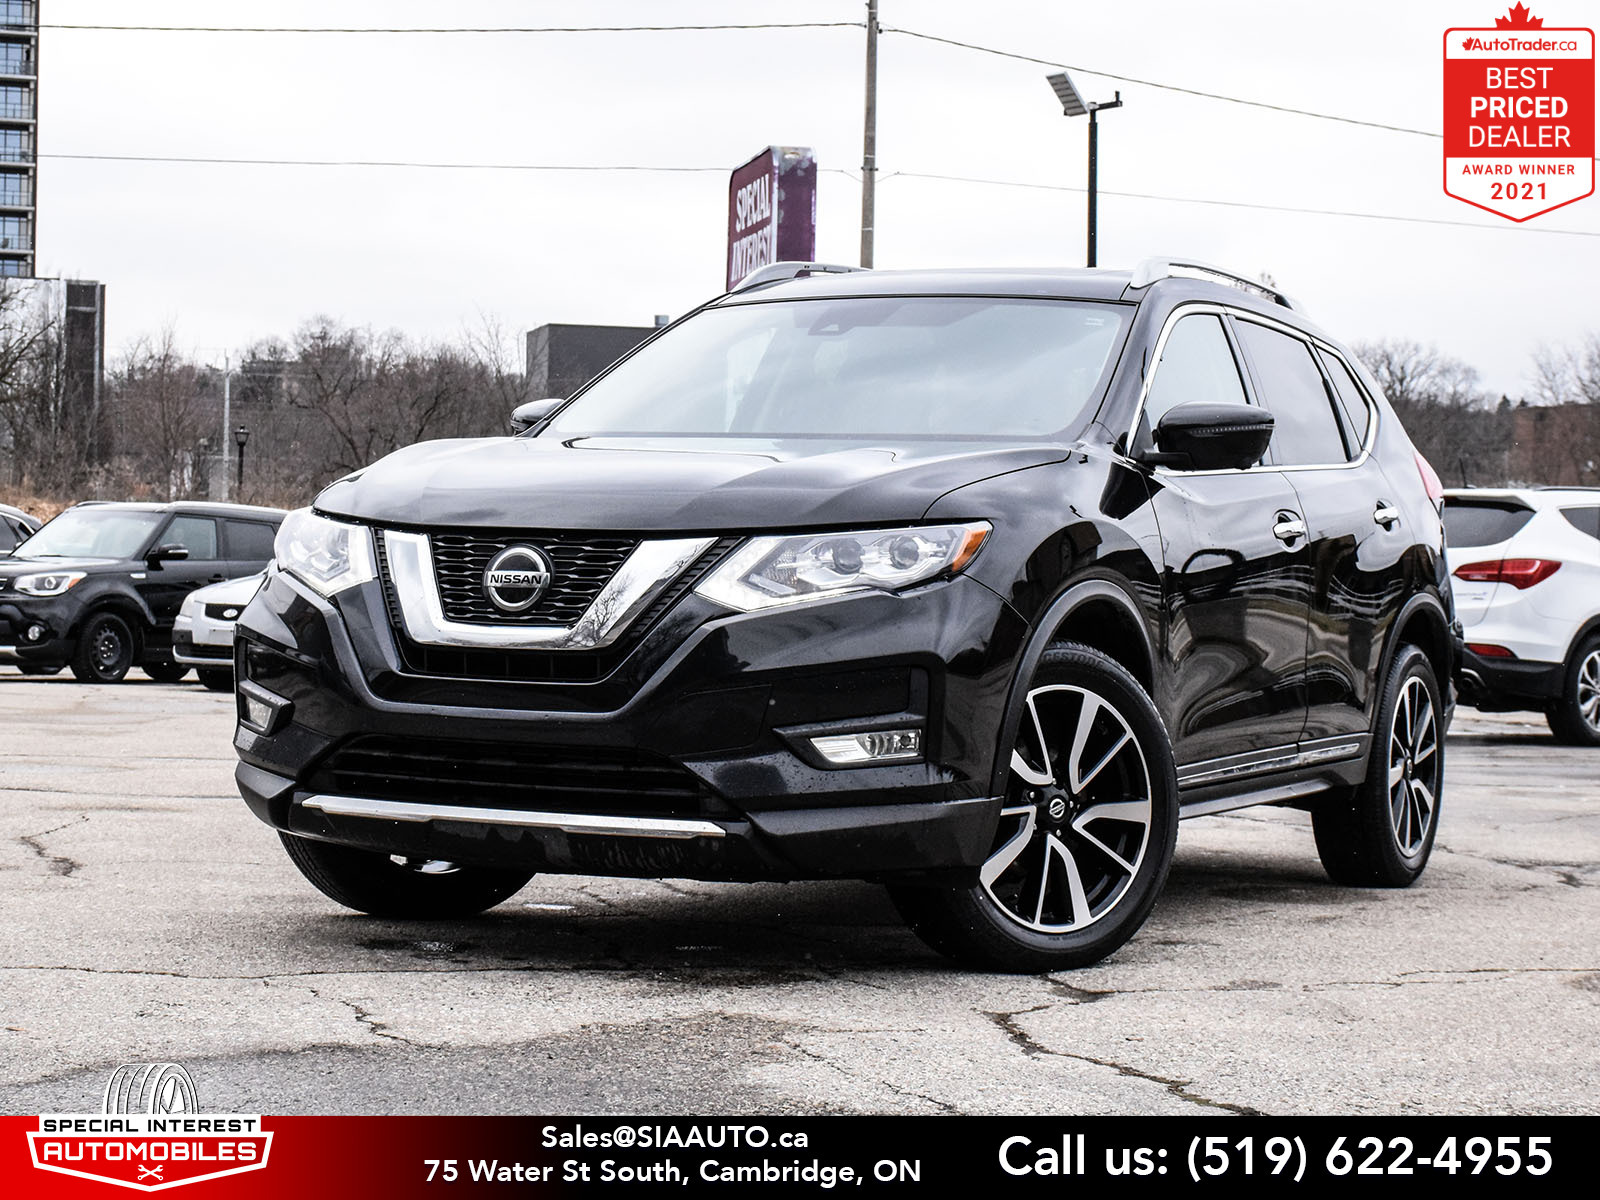 2019 Nissan Rogue AWD SL * Accident Free * One Owner * Certified